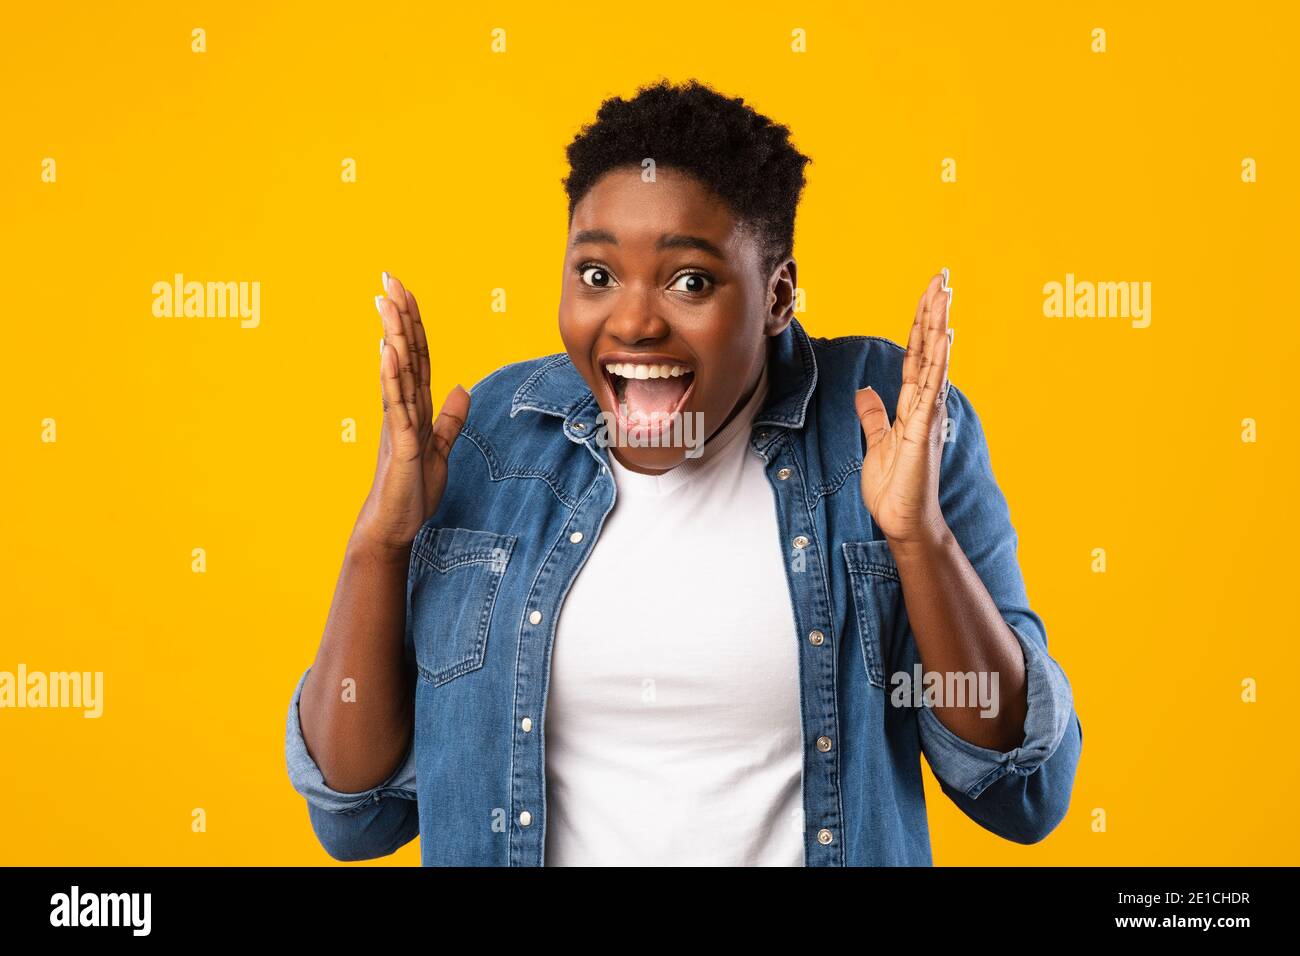 Excited African Woman Shouting In Excitement Posing Over Yellow Background Stock Photo